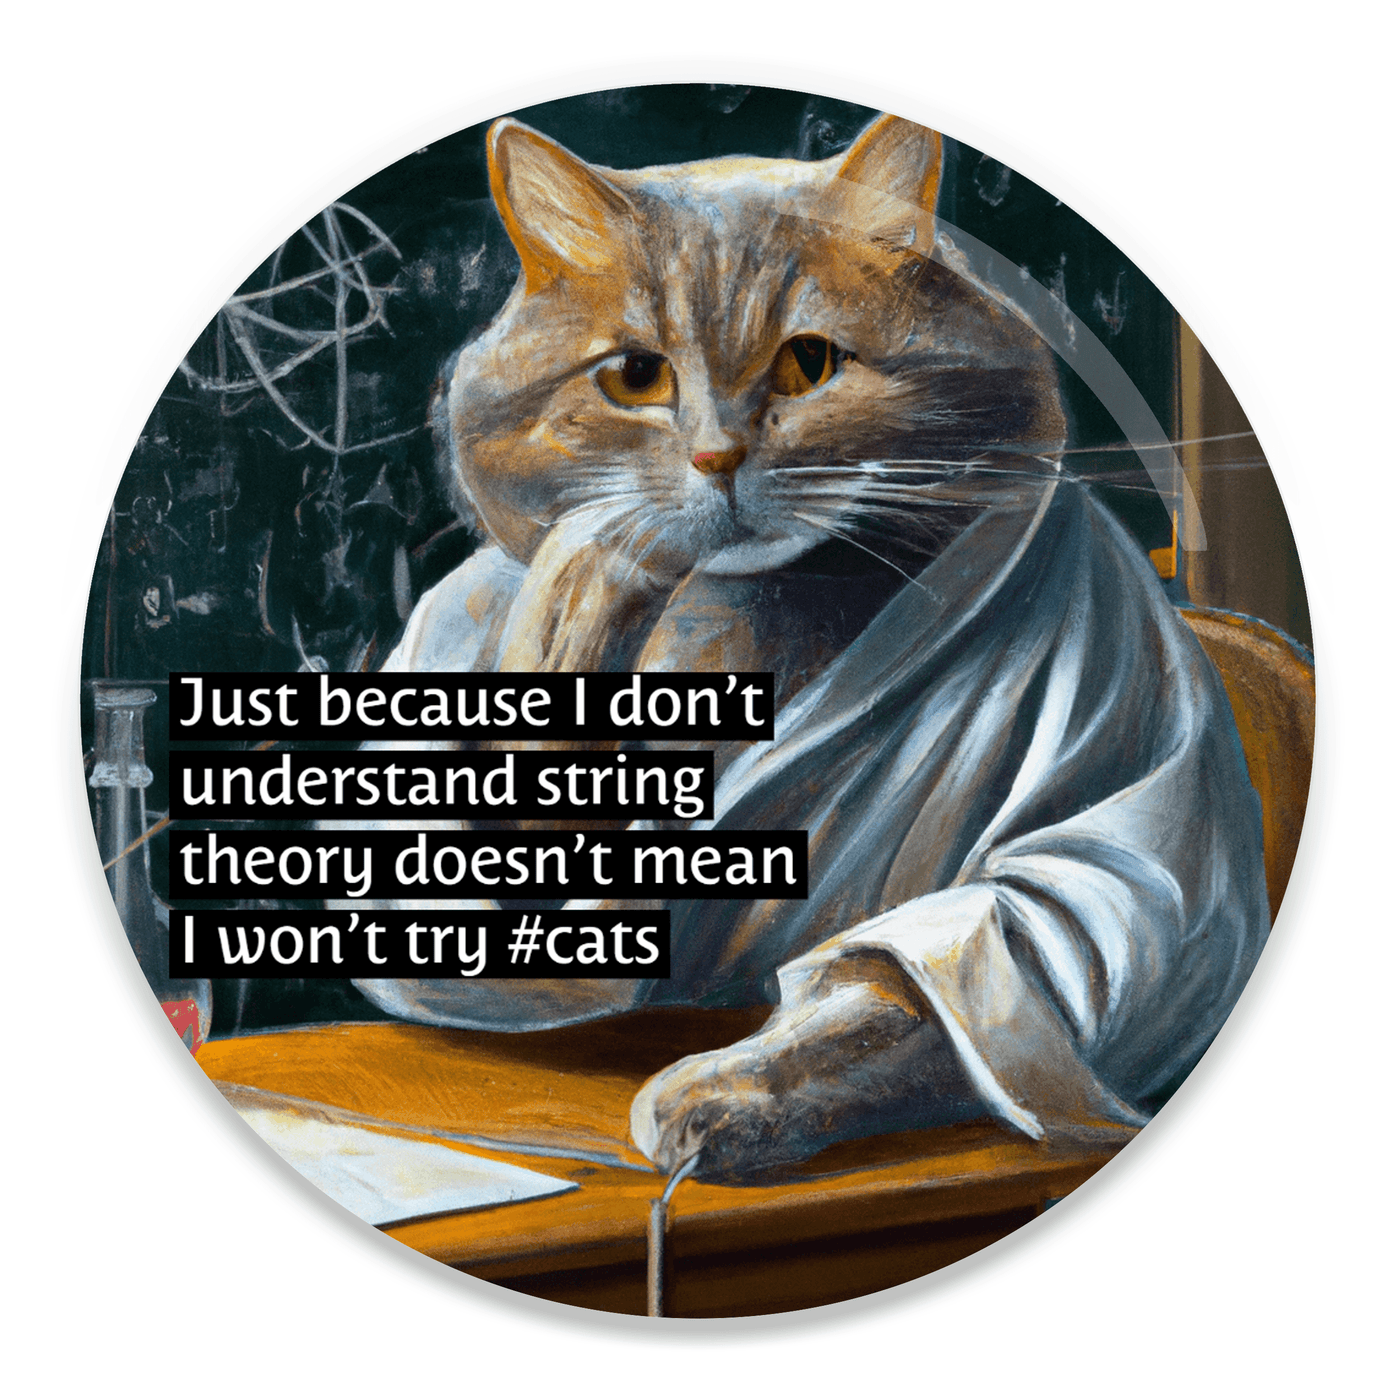 2.25 inch round colorful magnet with image of a cat and text about string theory